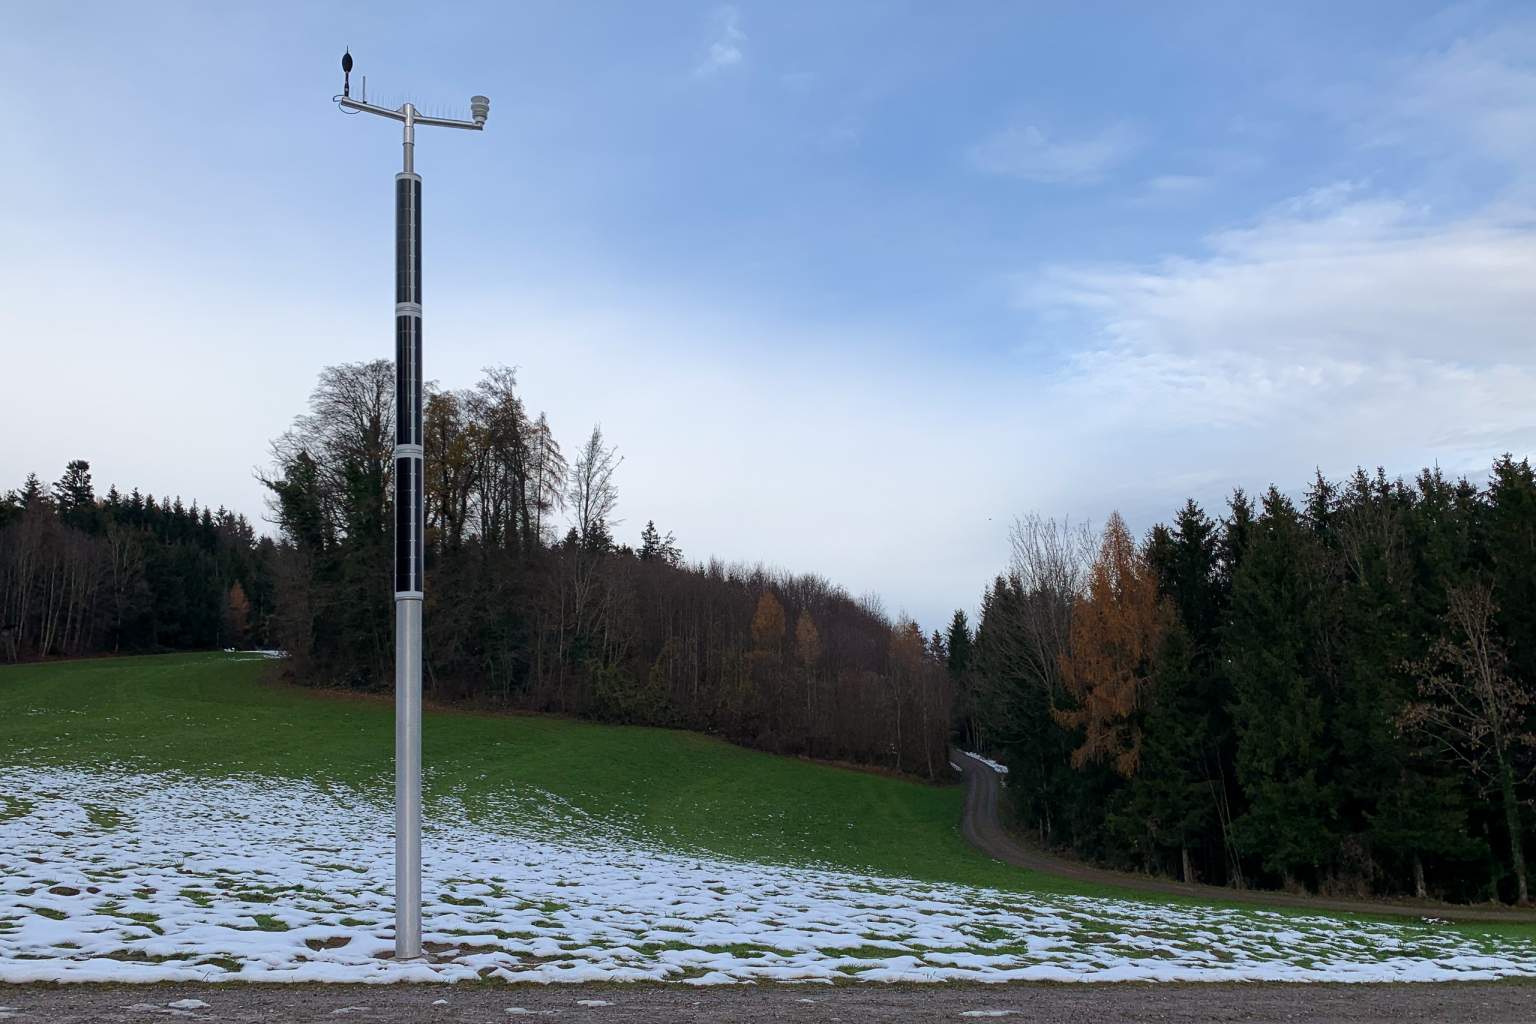 Soluxio smart pole for monitoring air traffic